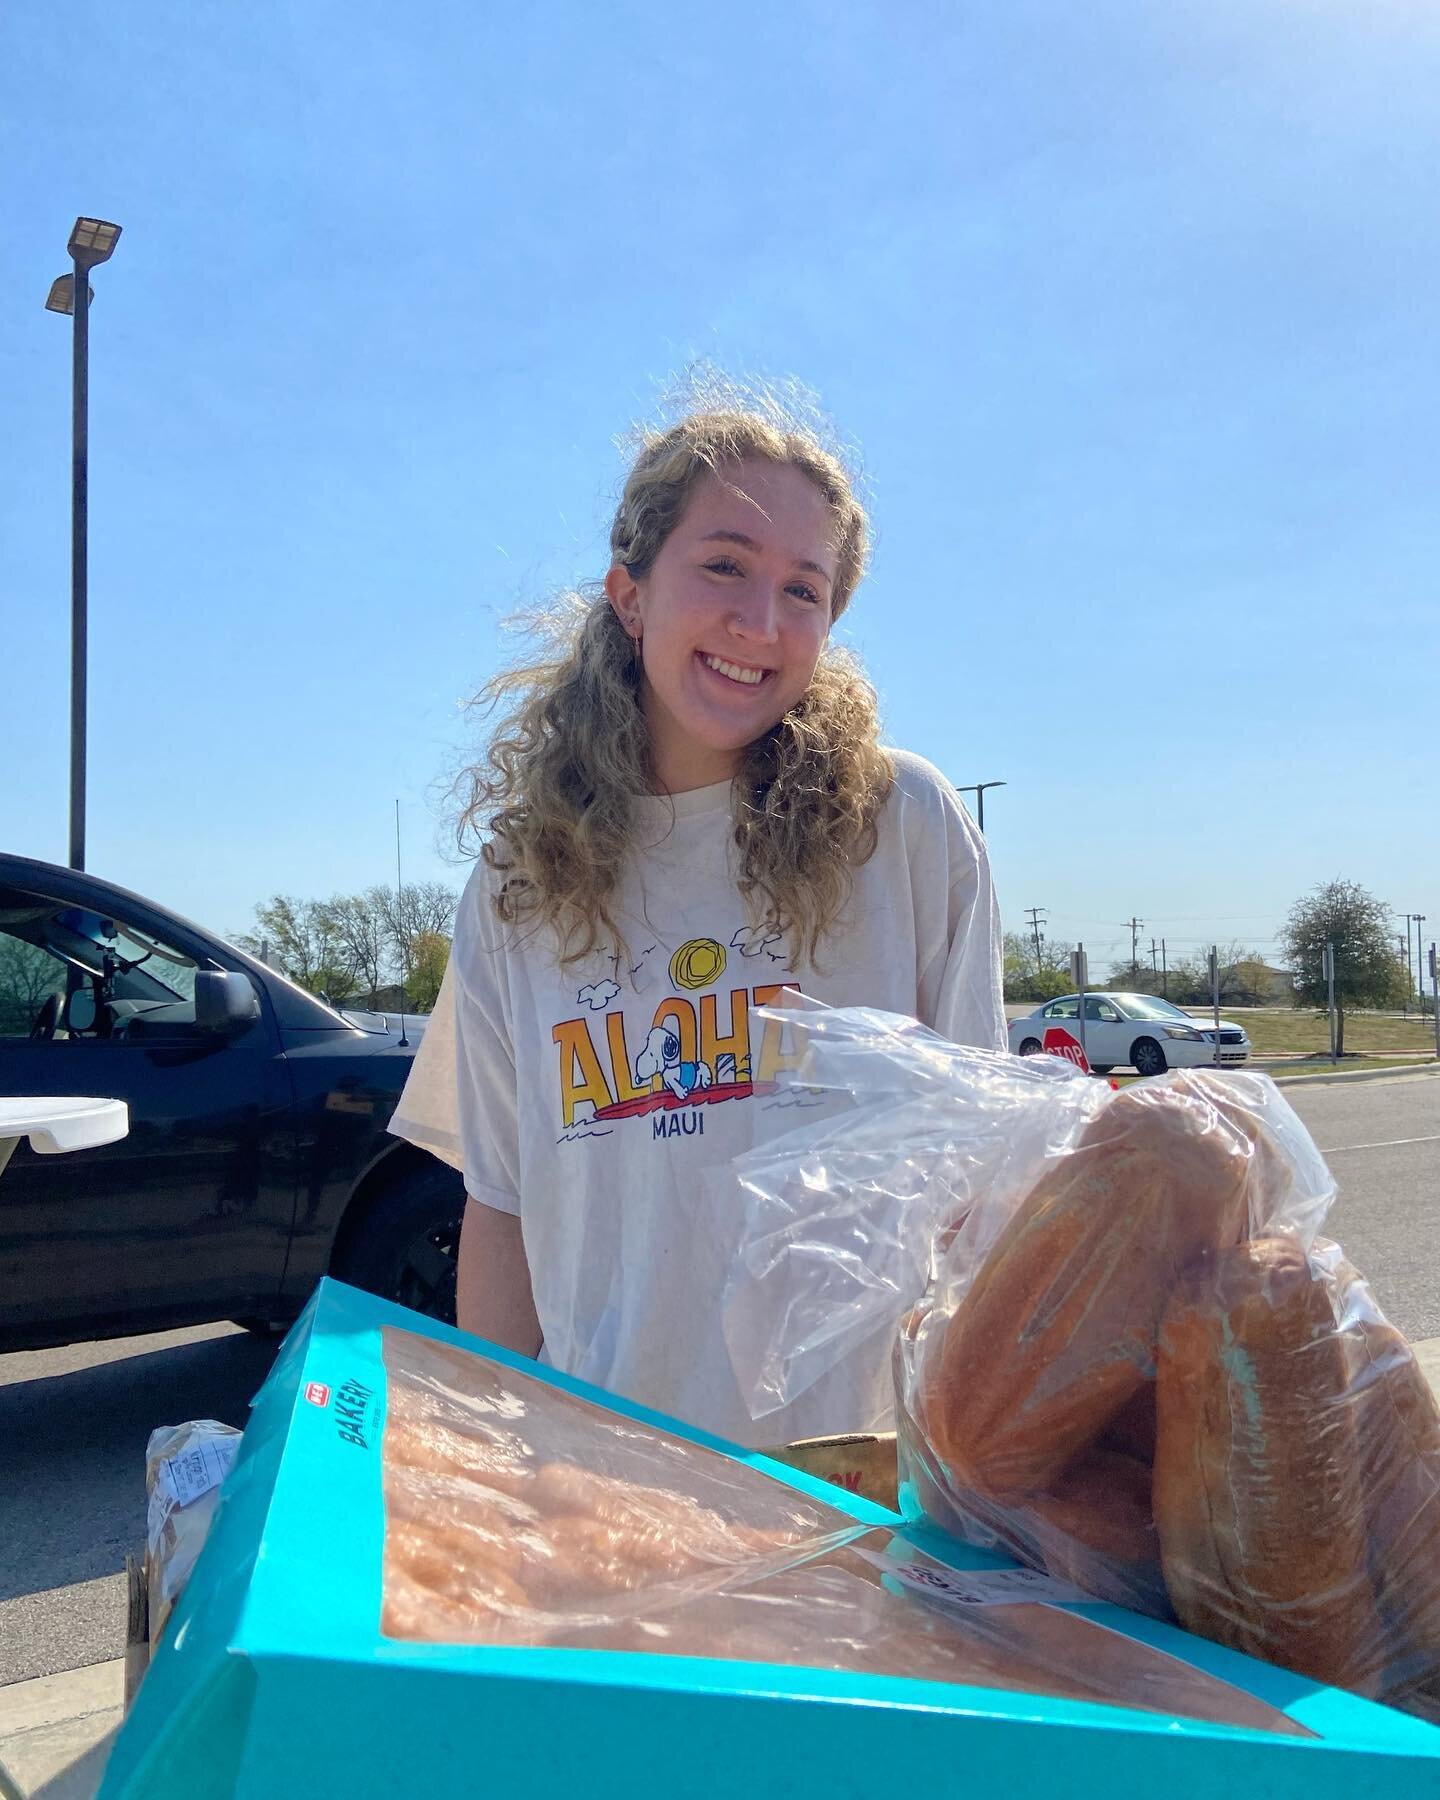 VOLUNTEER AT MOBILE FOOD DISTRIBUTION 
Friday, April 22, 9:30 a.m. - 11:30 a.m.
Rattler Stadium
Hays County Food Bank

Volunteer at Hays County Food Bank to help feed neighbors in need! Click the link in our bio to see more volunteer opportunities! 
